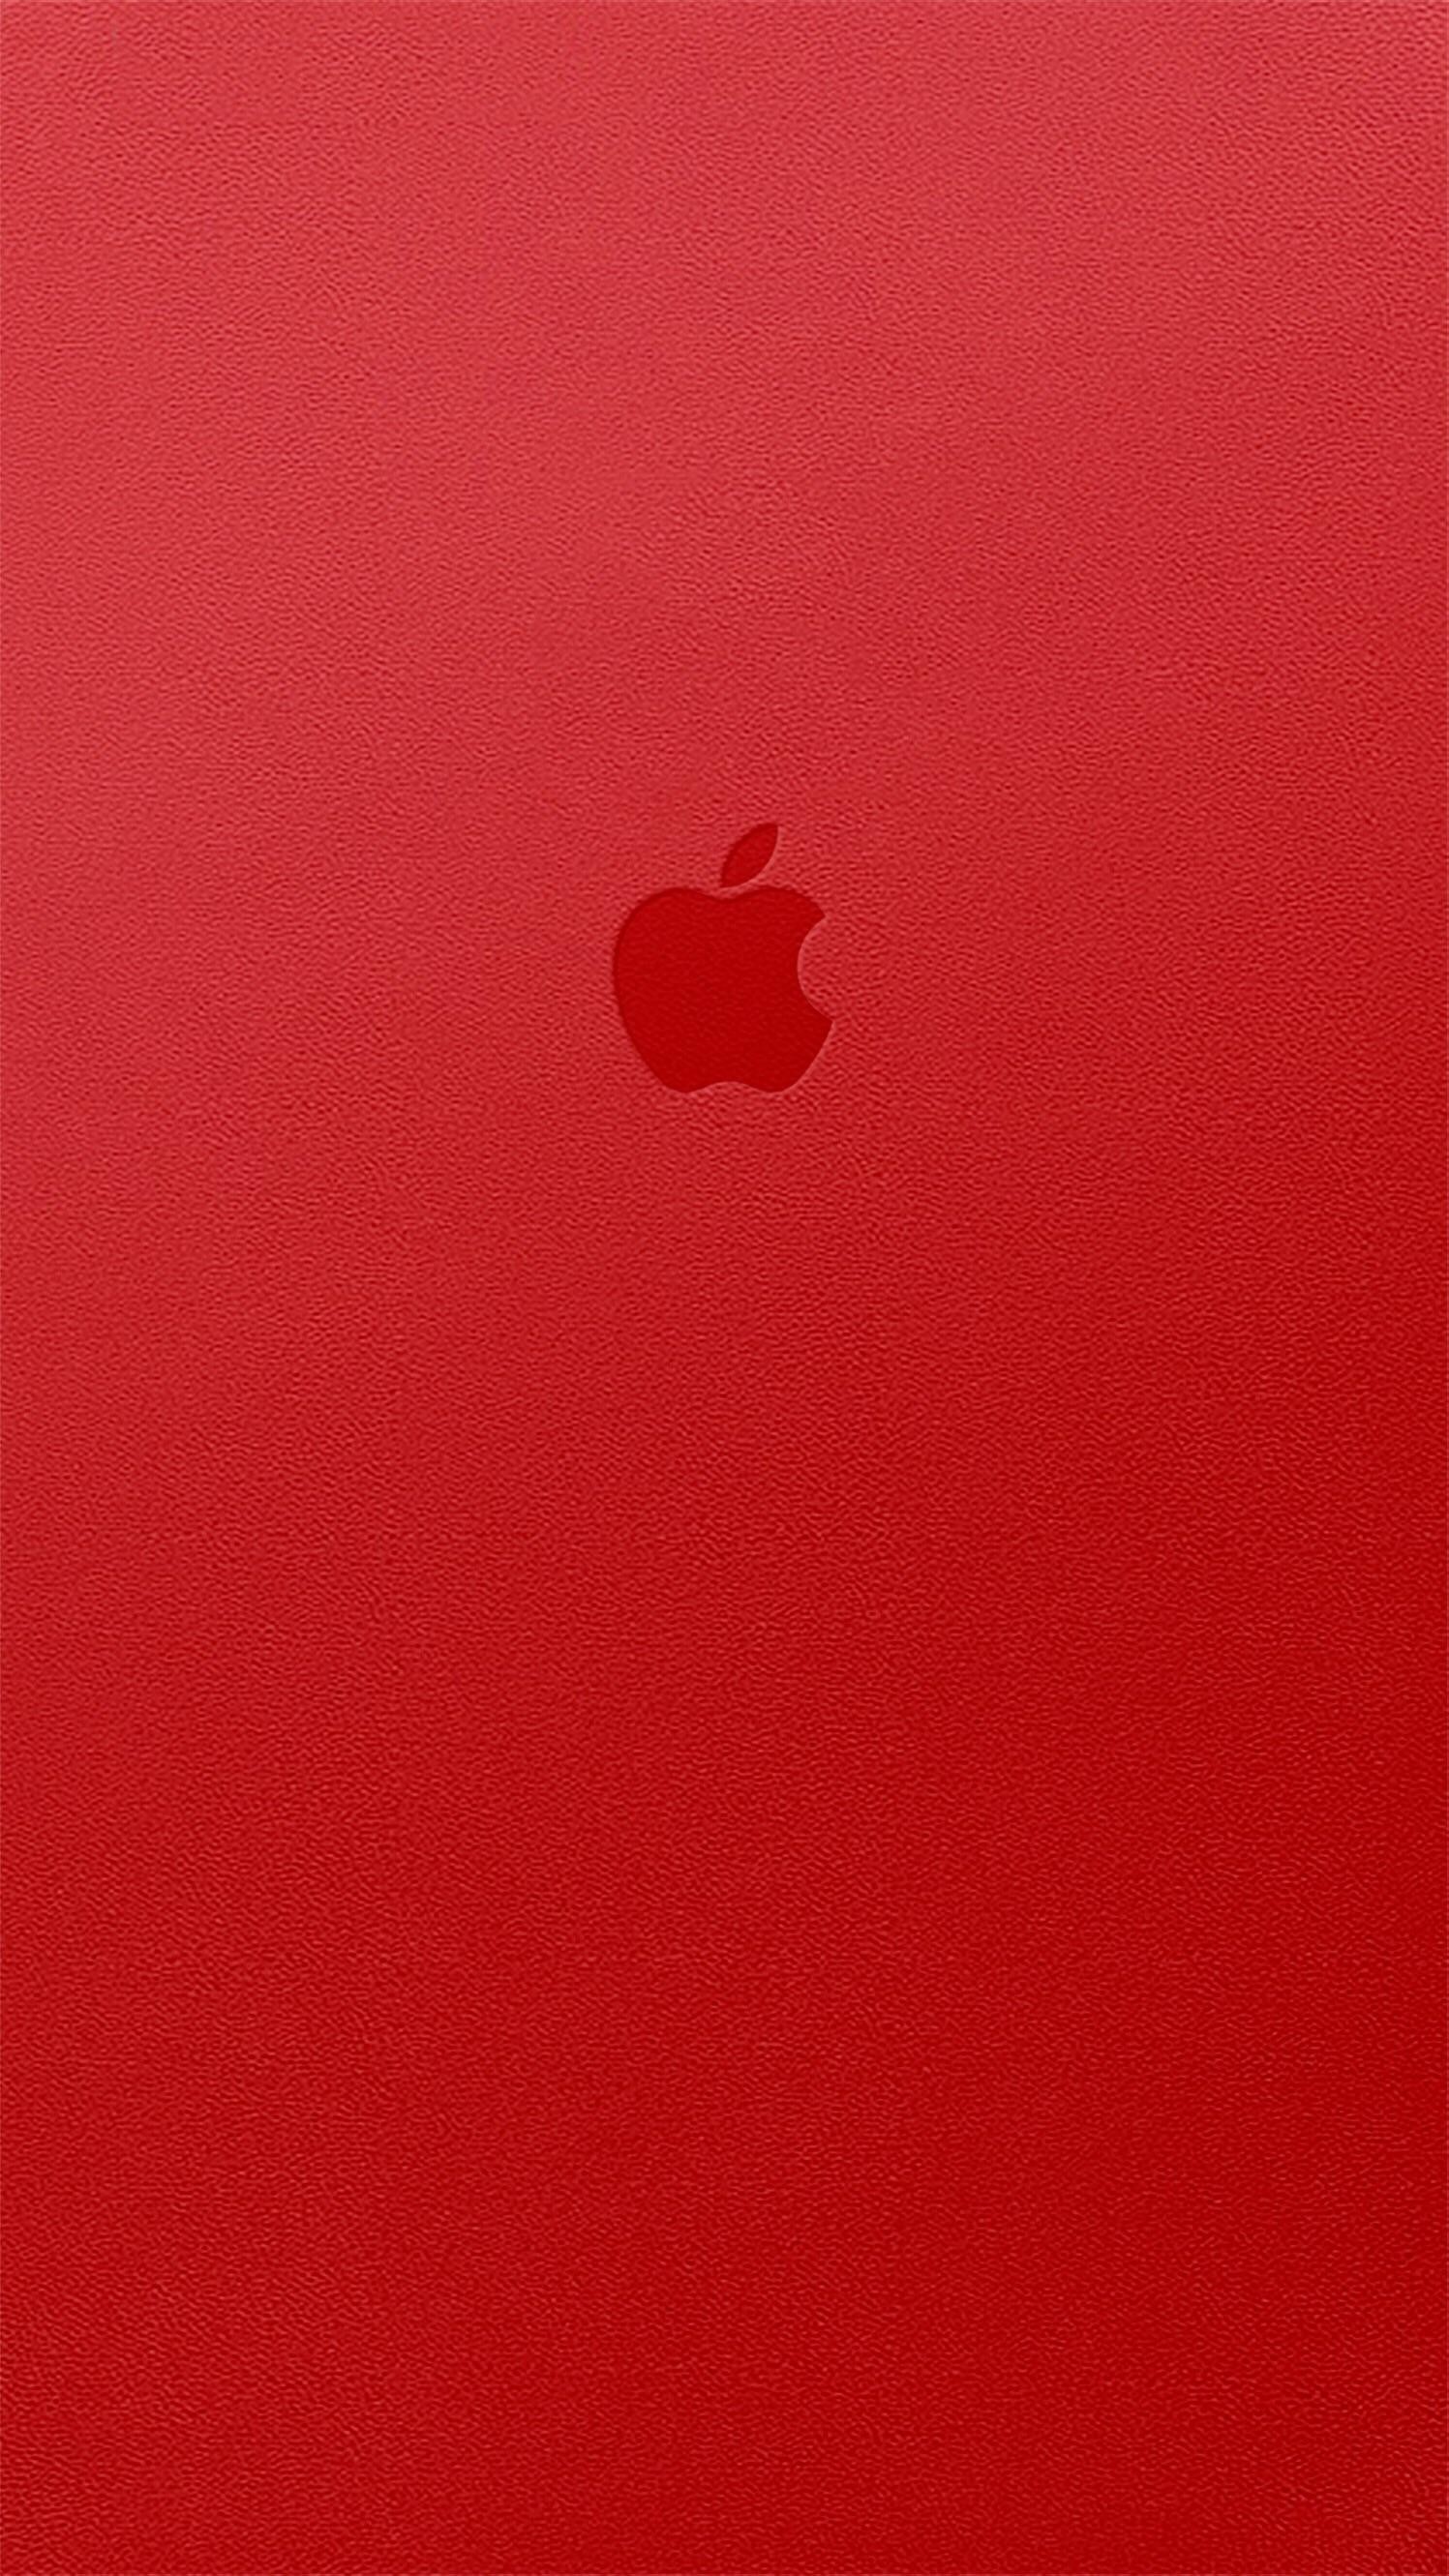 1497x2662 Red iPhone wallpaper ...